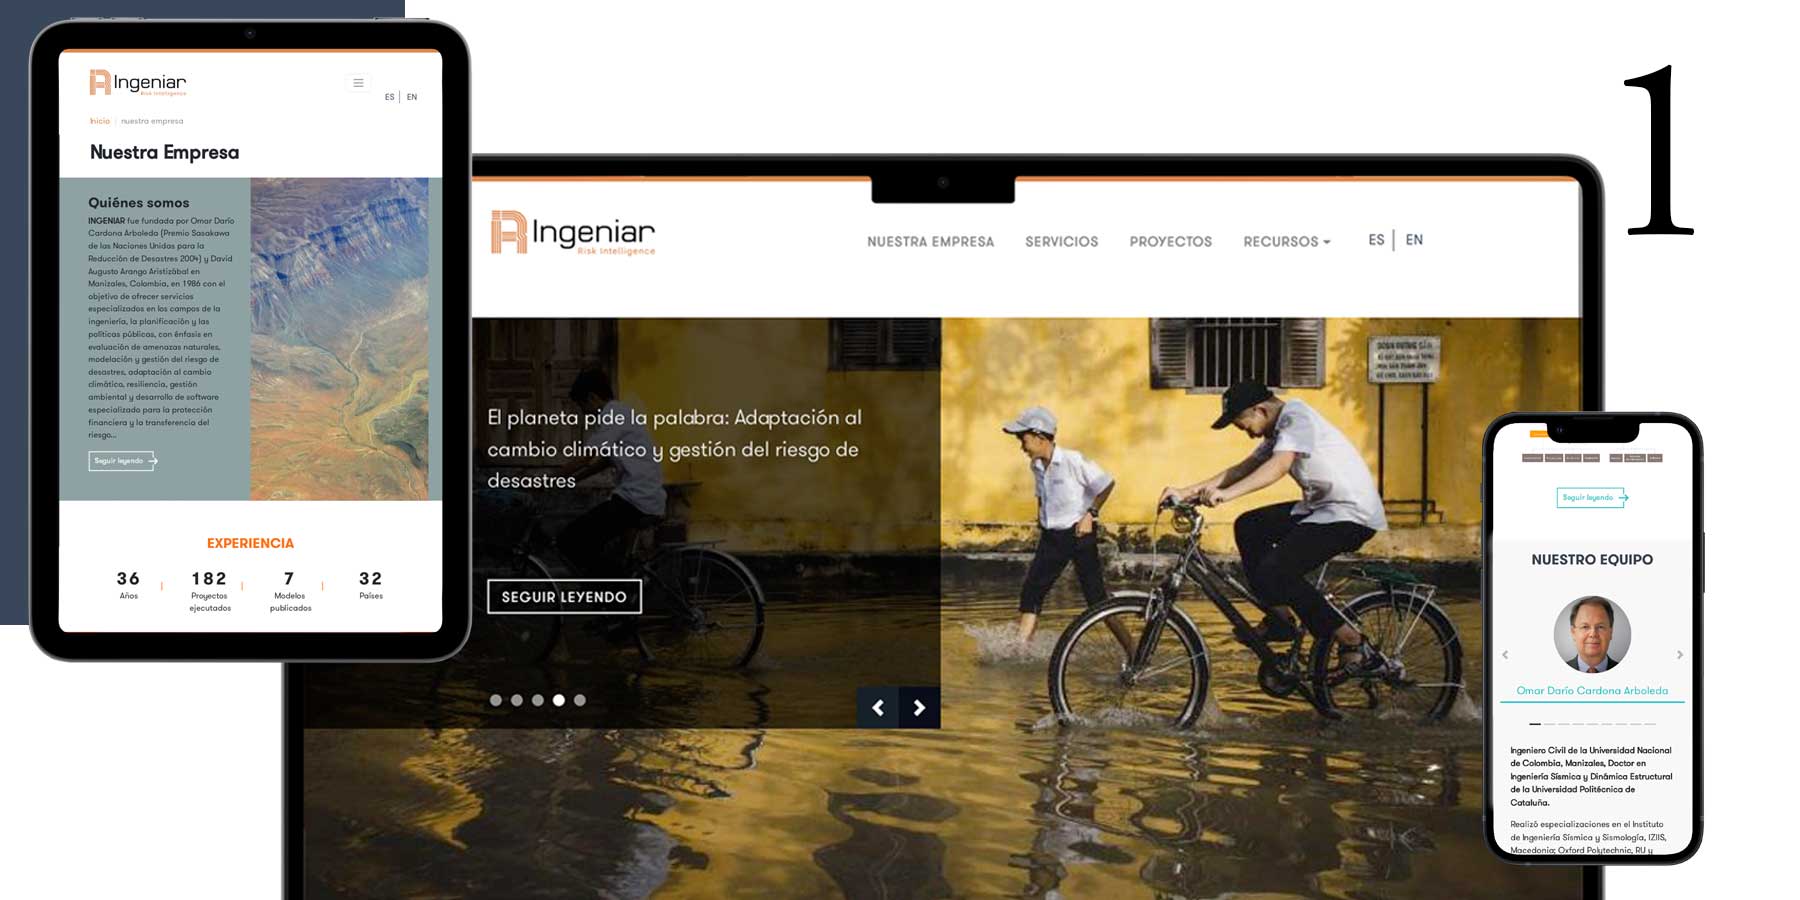 Ingeniar's website Home screen shown in three viewports: tablet, laptop and mobile.